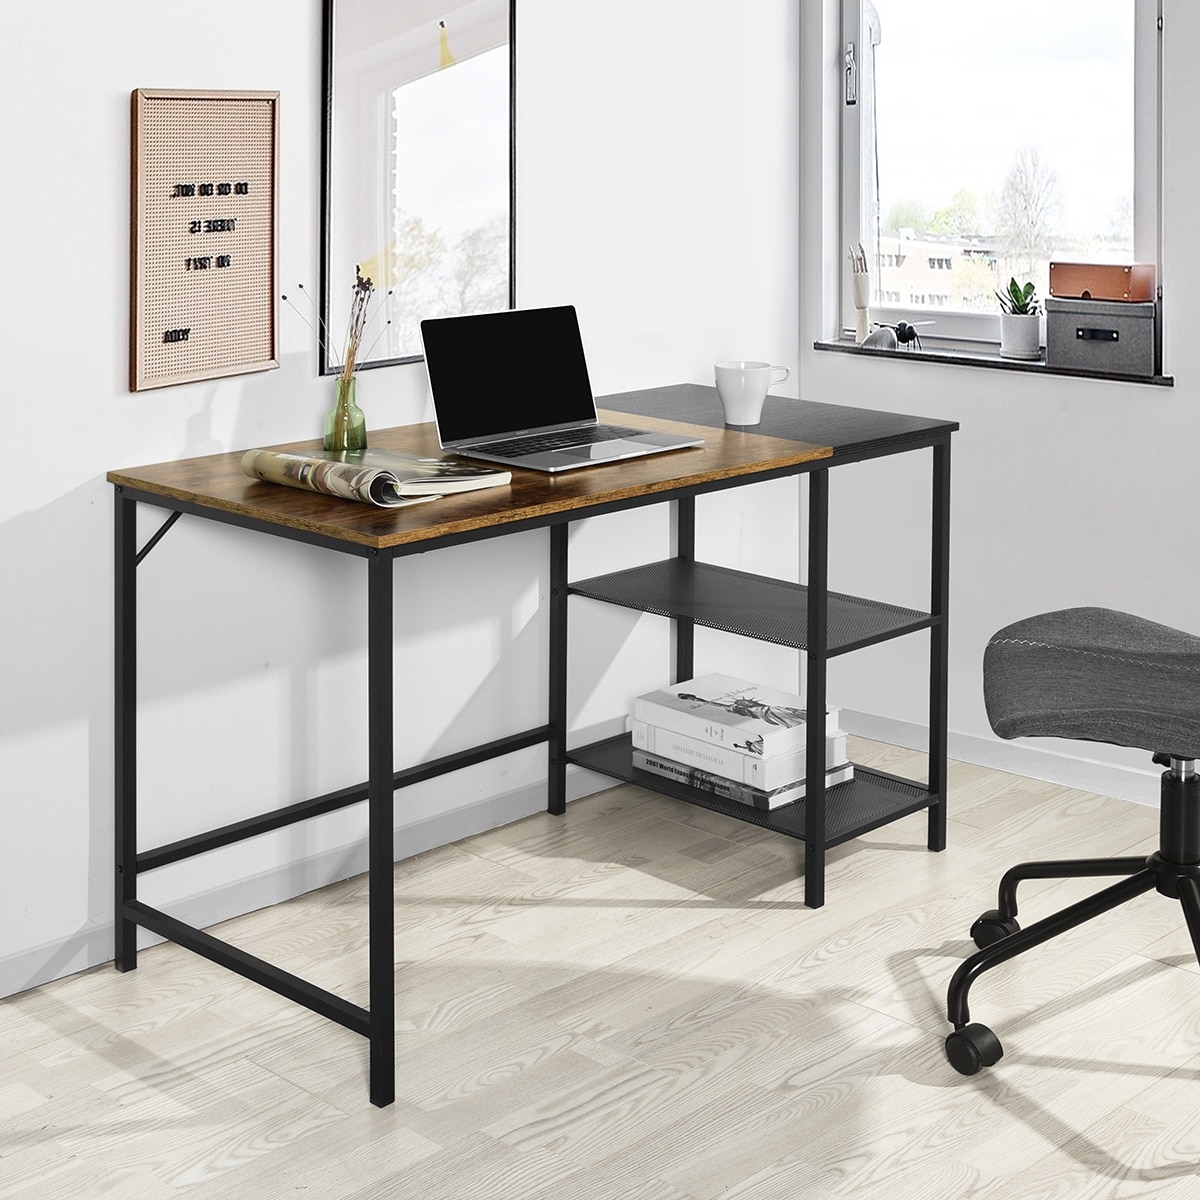 https://ak1.ostkcdn.com/images/products/is/images/direct/4e2f2018e88e5bd00dfa2f8d4f8597626a45d15f/Writing-Table-with-2-Storage-Shelves-for-Office-Study-Computer-Desk.jpg